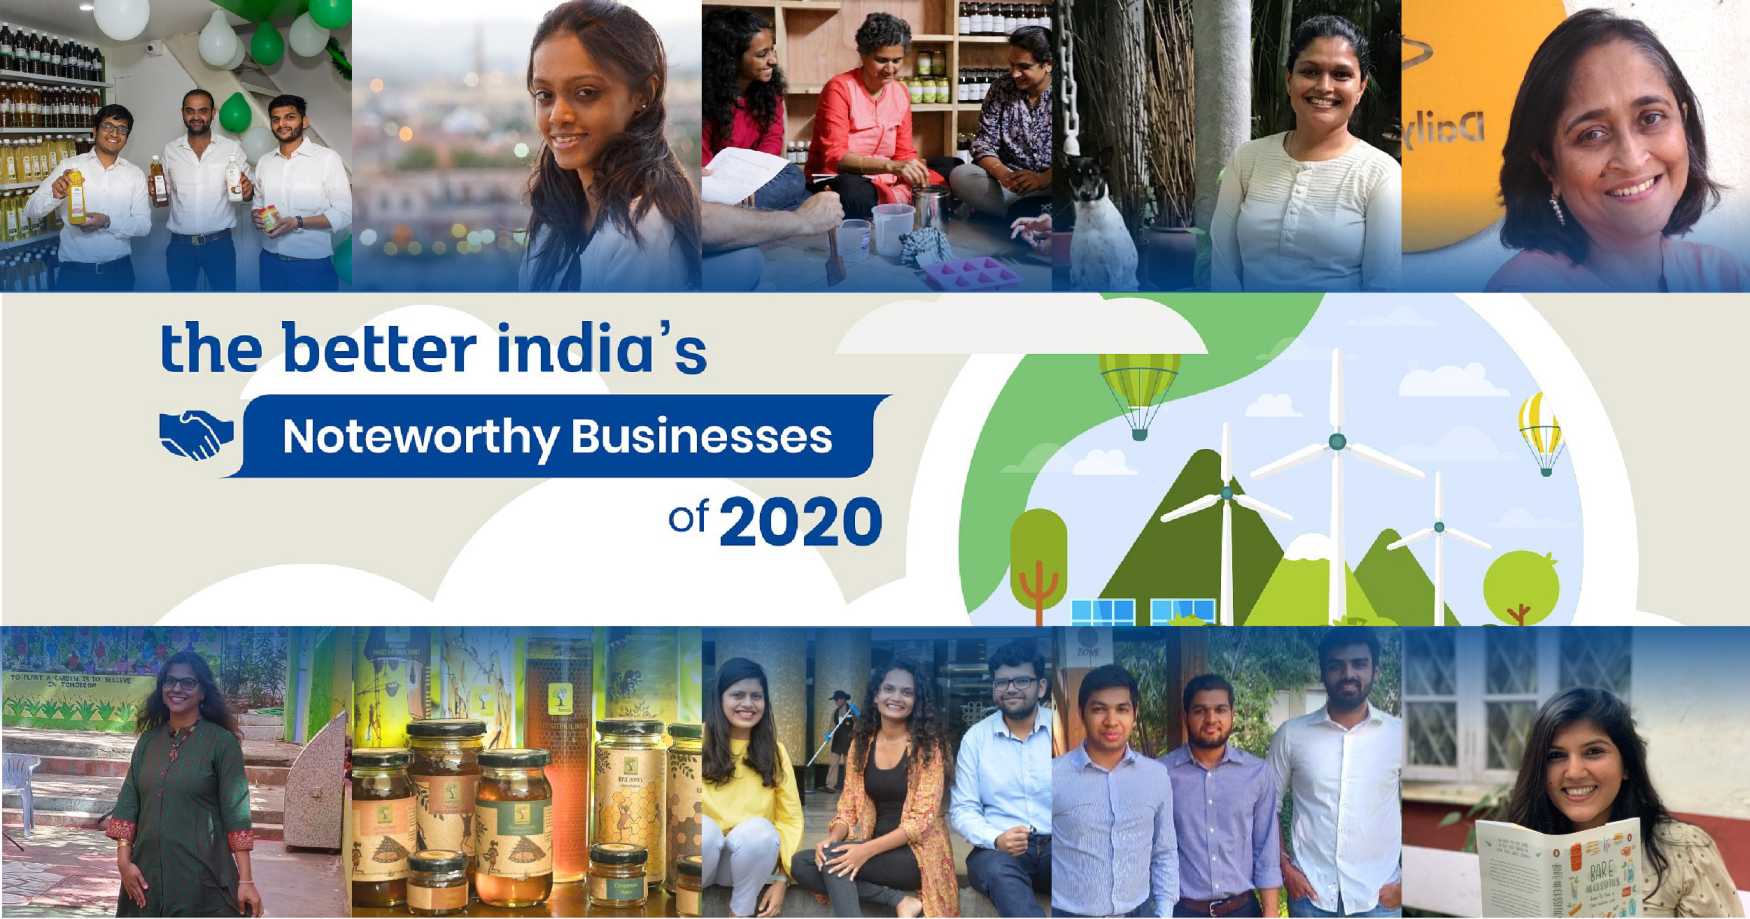 Presenting: The Better India’s Best of 2020 – Noteworthy Businesses